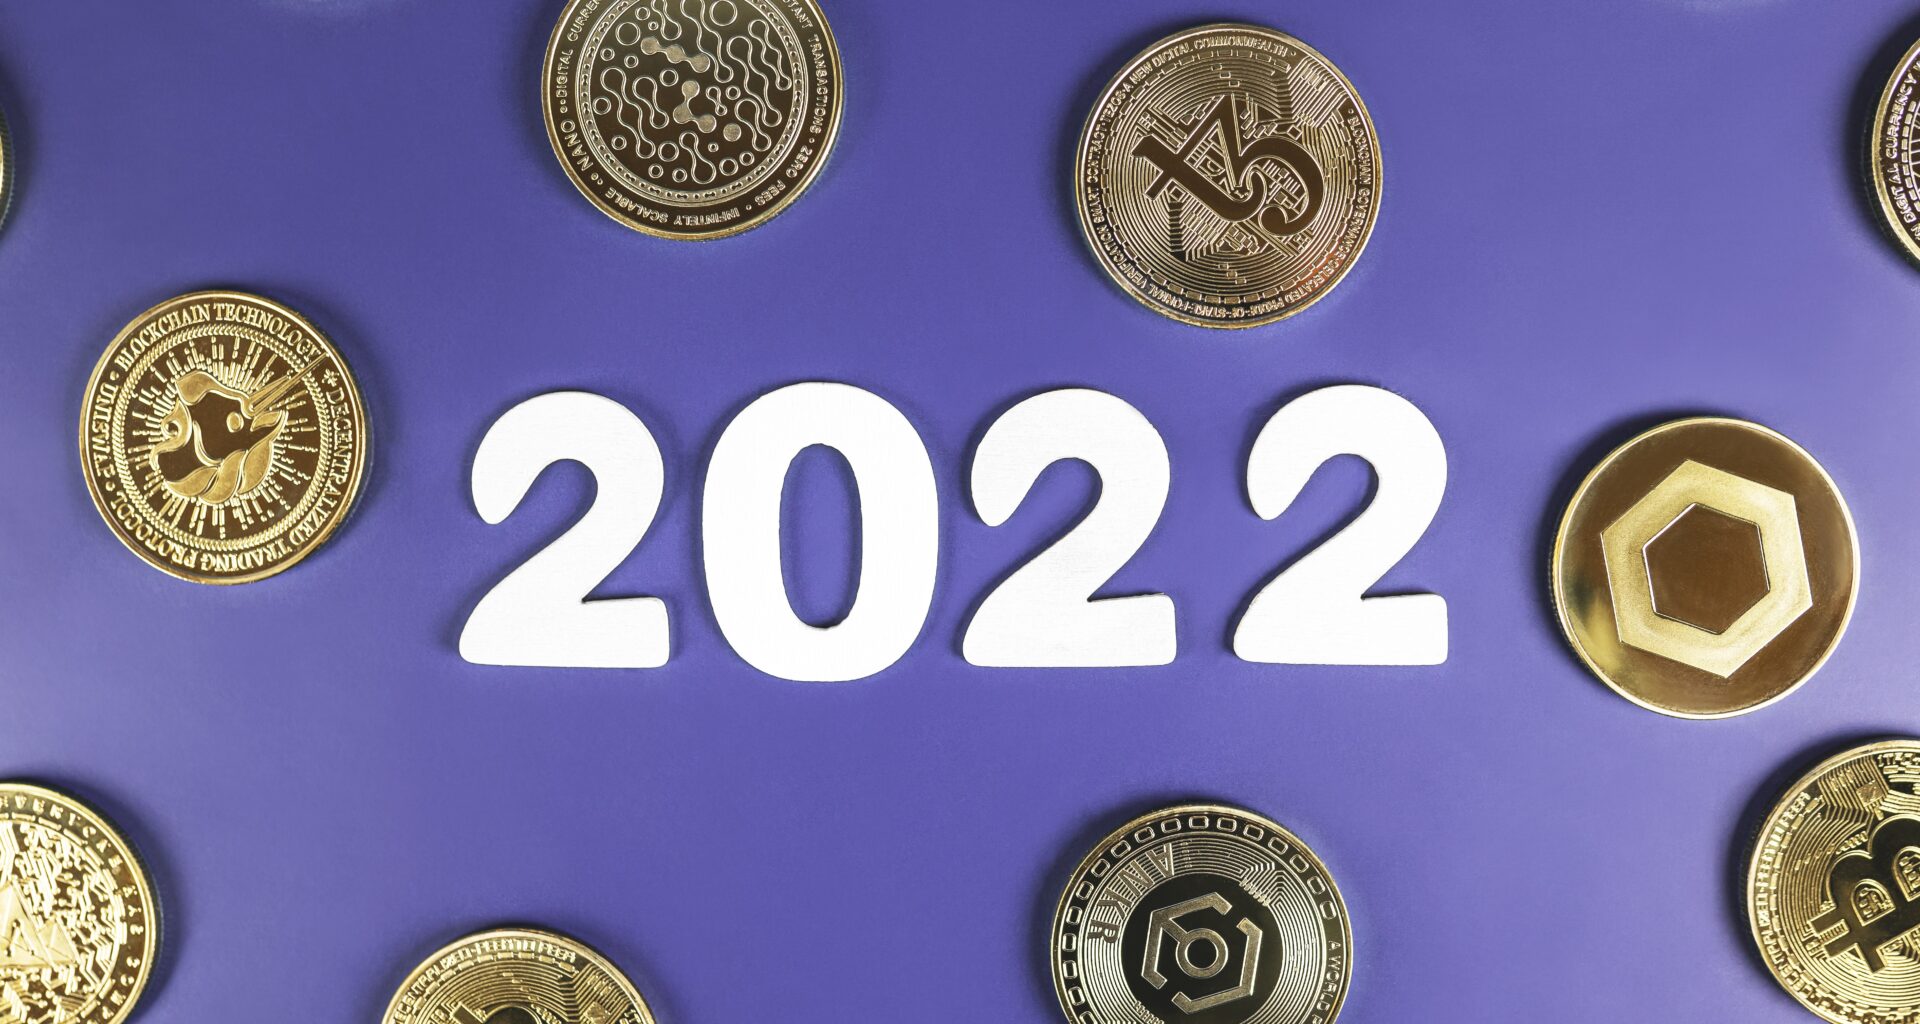 The number "2022" in white against a purple background. There are several gold coins with different crypto logos embossed on them scattered around the background.